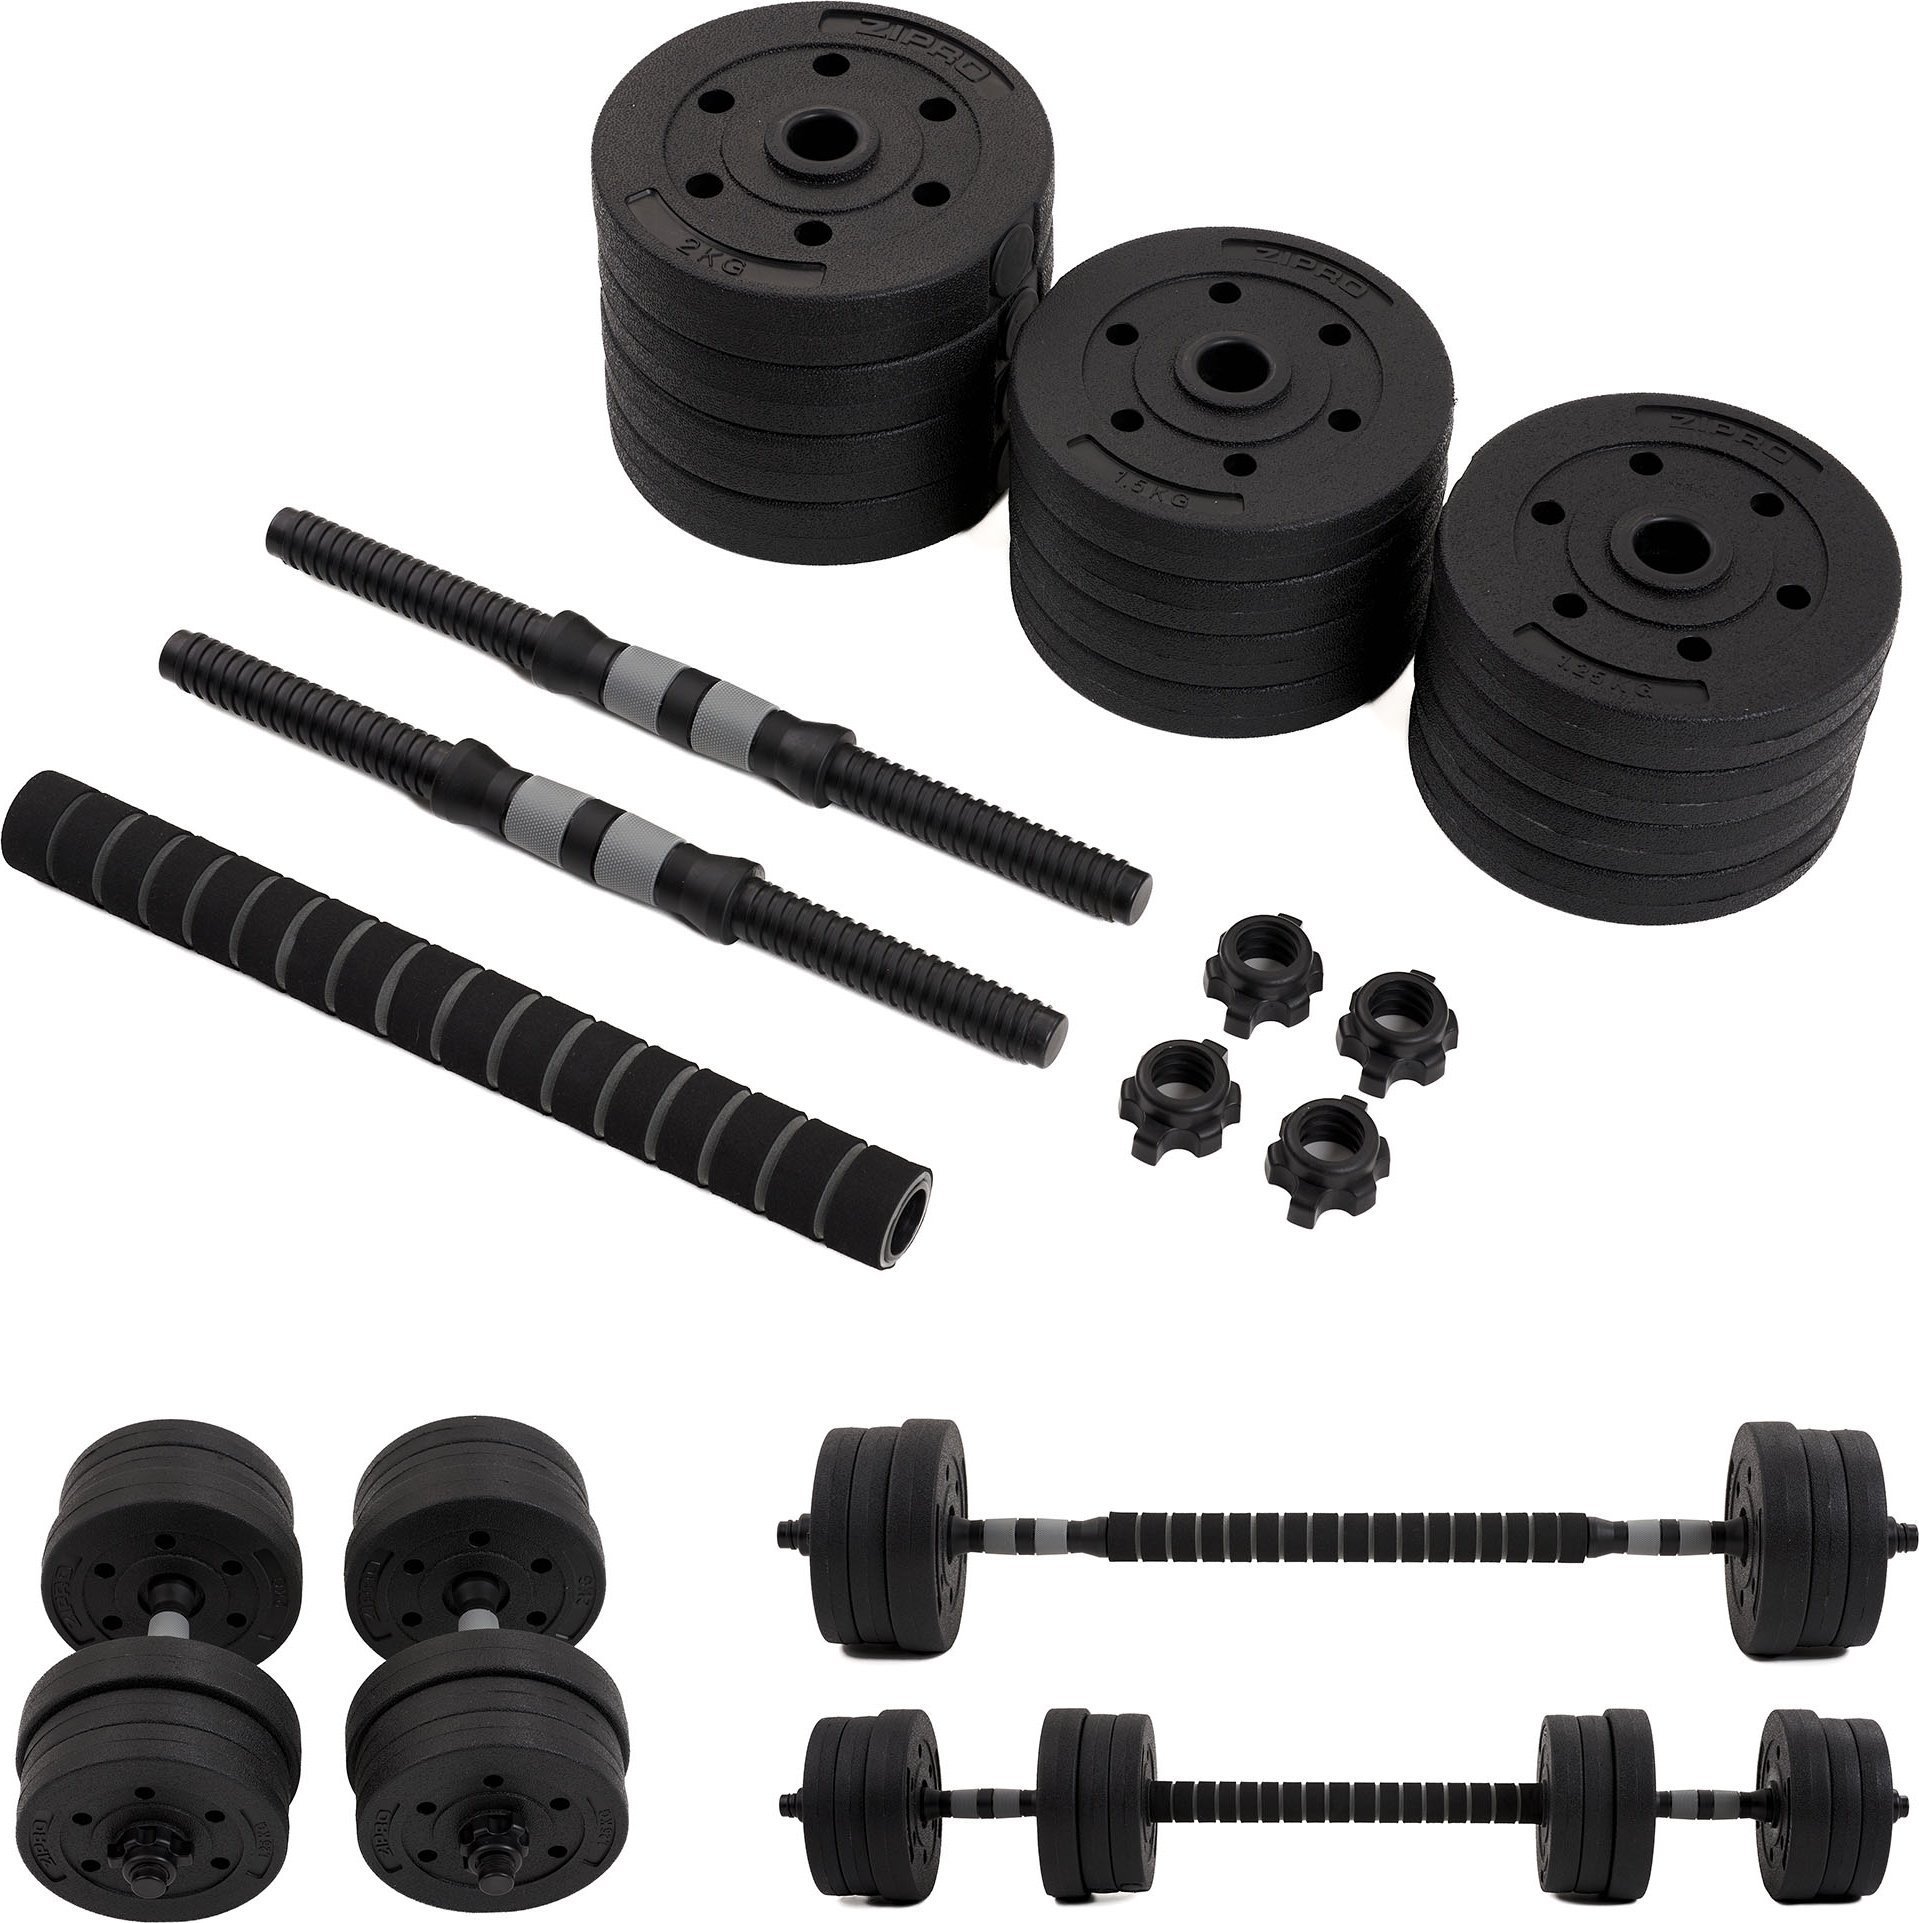 Zipro ZIPRO CEMENT BARBELL AND DUMBBELL SET 20KG